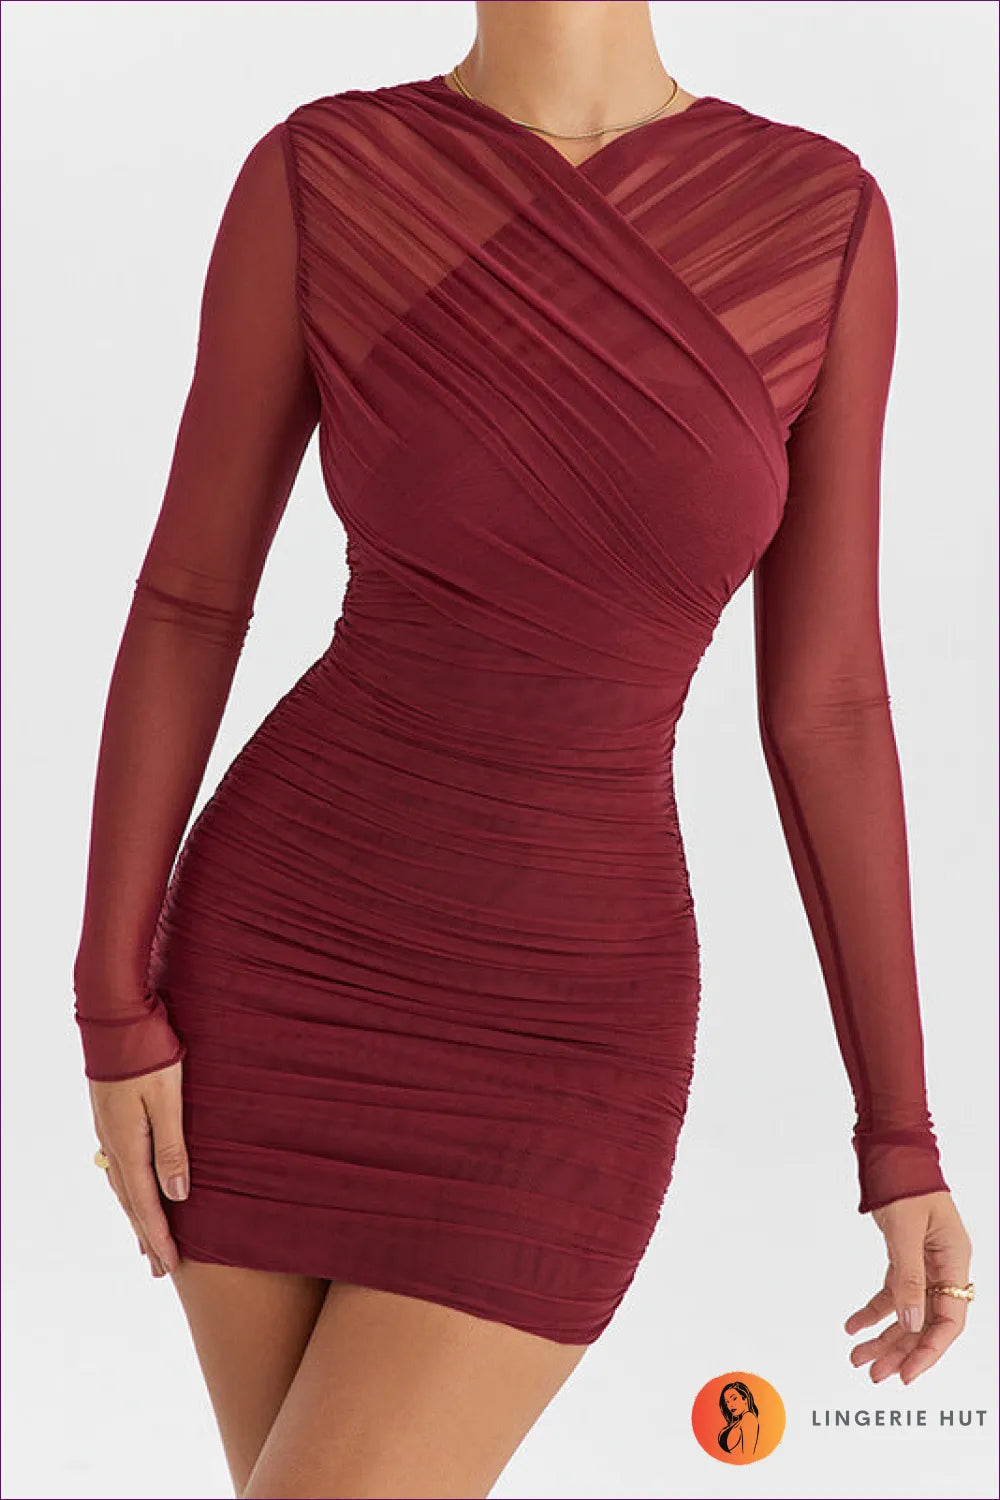 Add The Elegance Enwrapped Bodycon Dress To Your Collection And Step Out In Unmatched Elegance. -